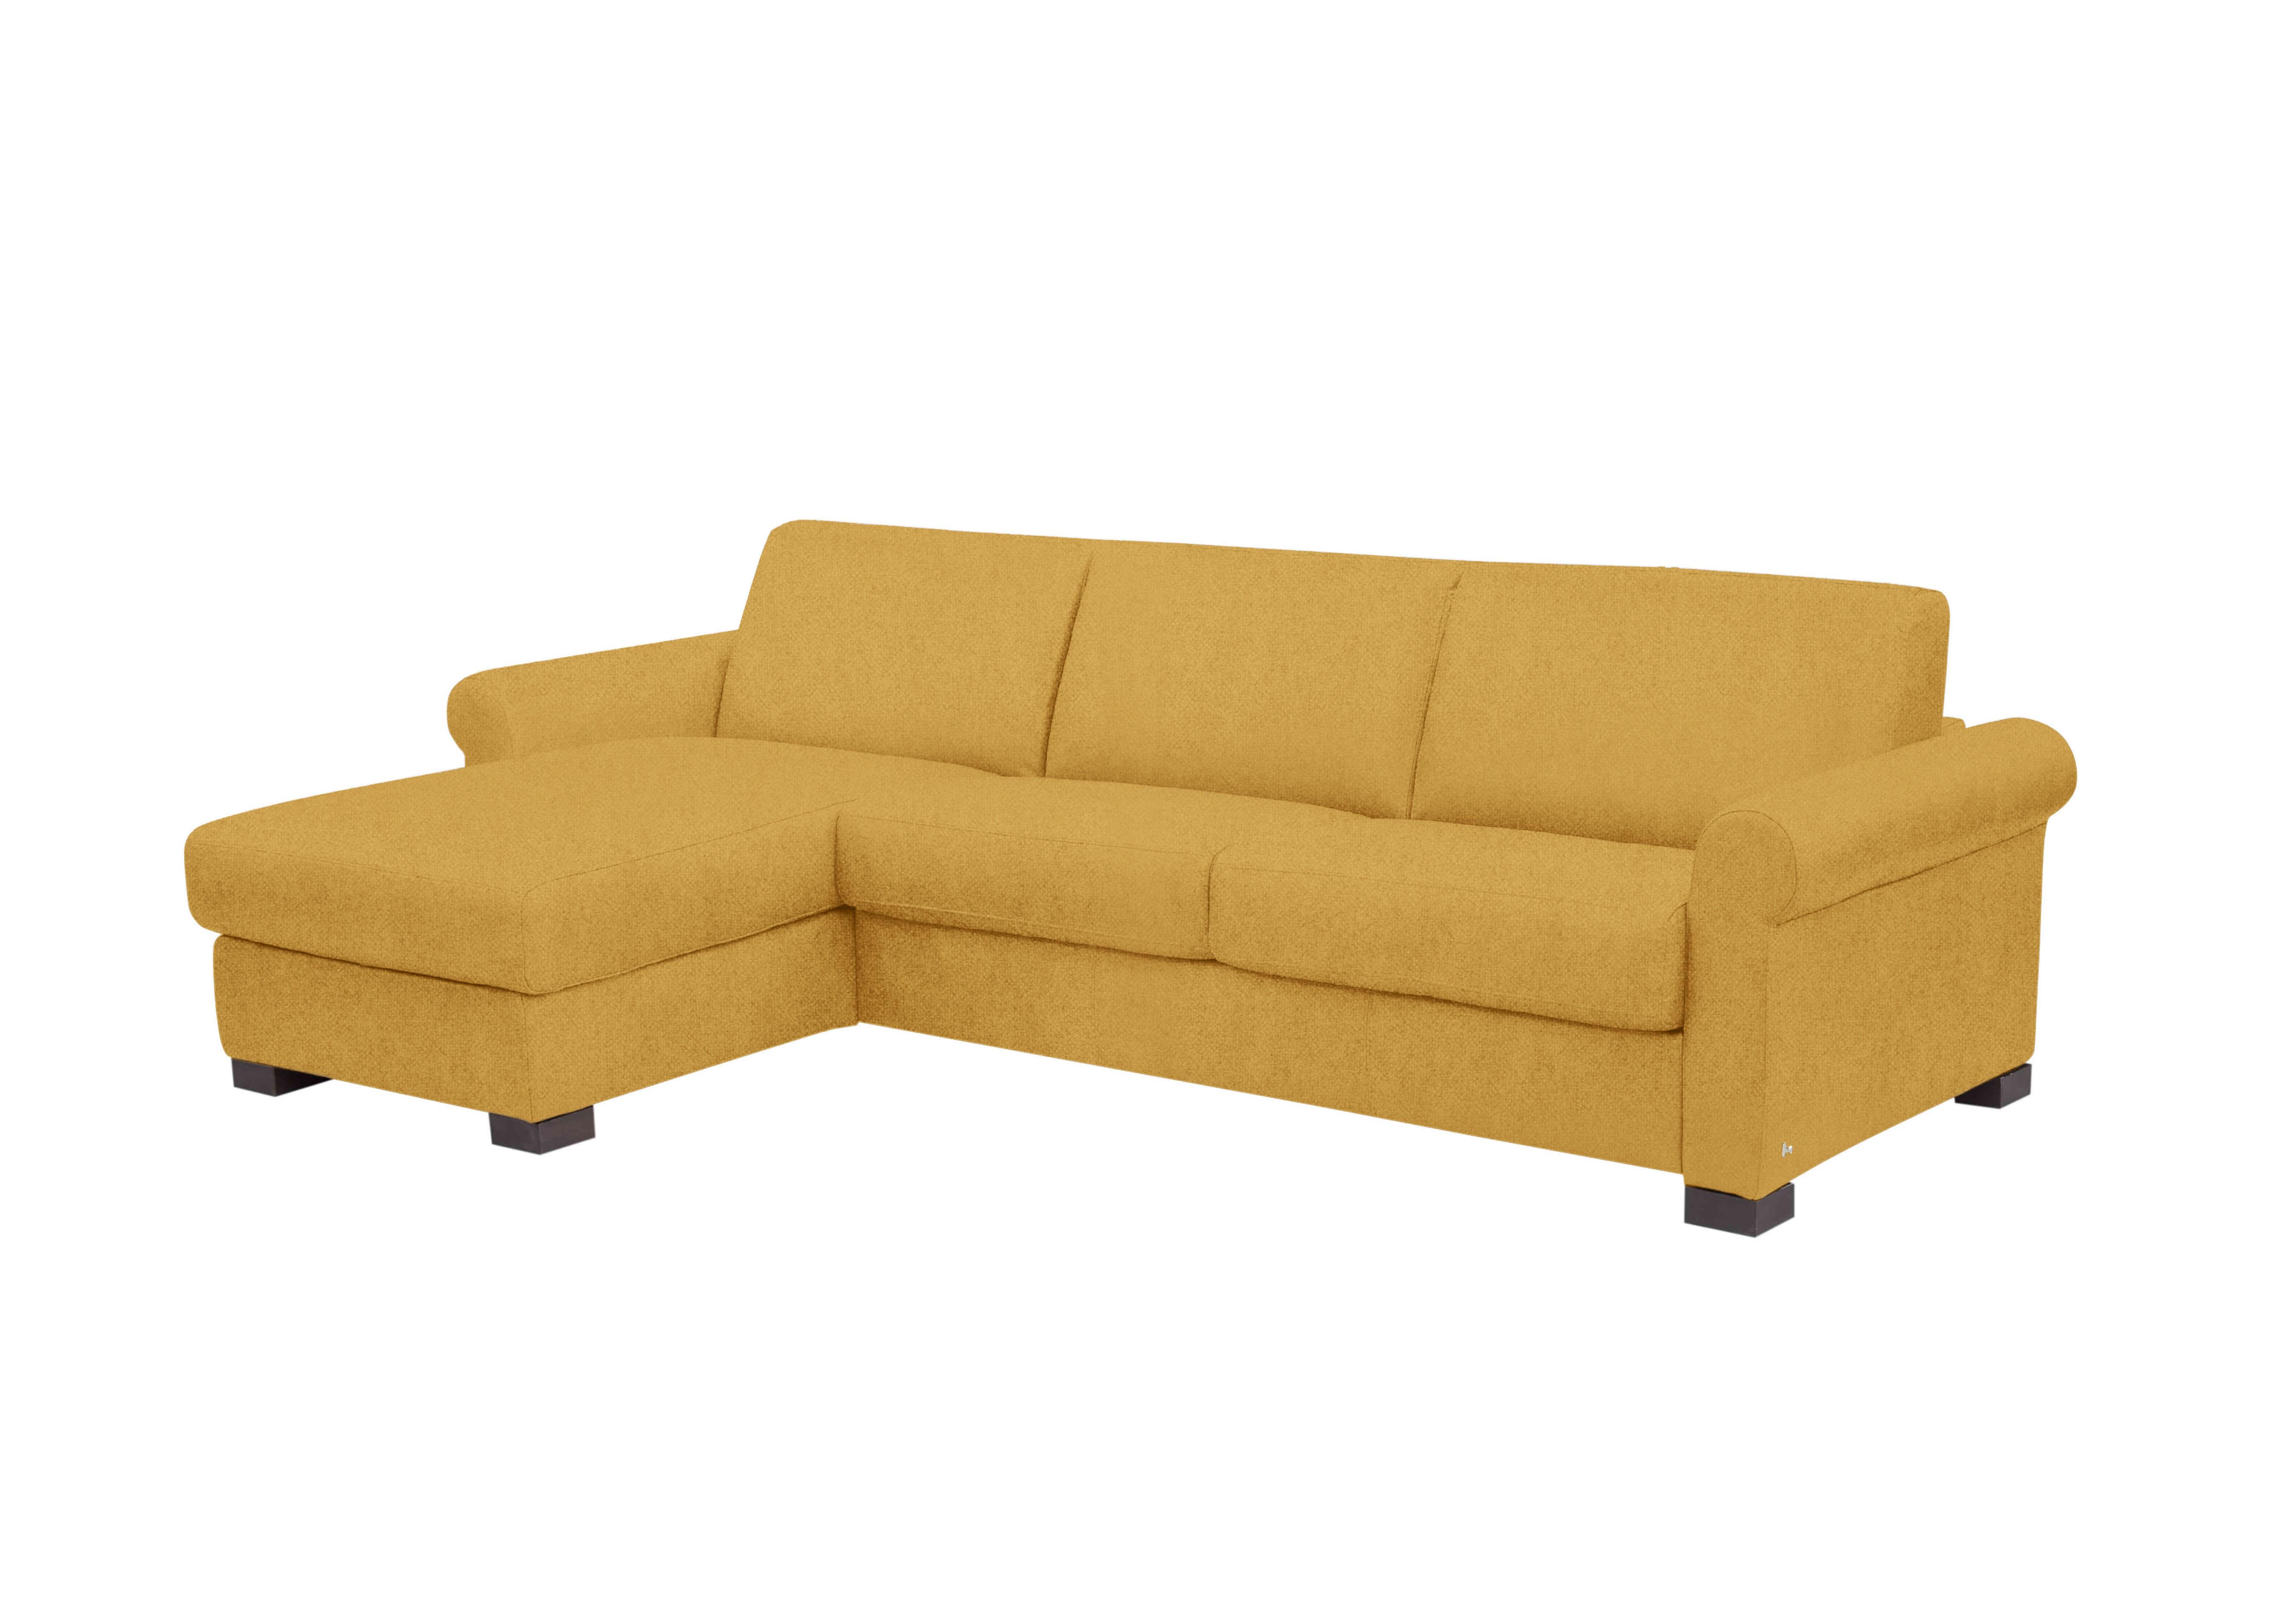 Alcova 3 Seater Fabric Sofa Bed with Storage Chaise with Scroll Arms in Fuente Mostaza on Furniture Village